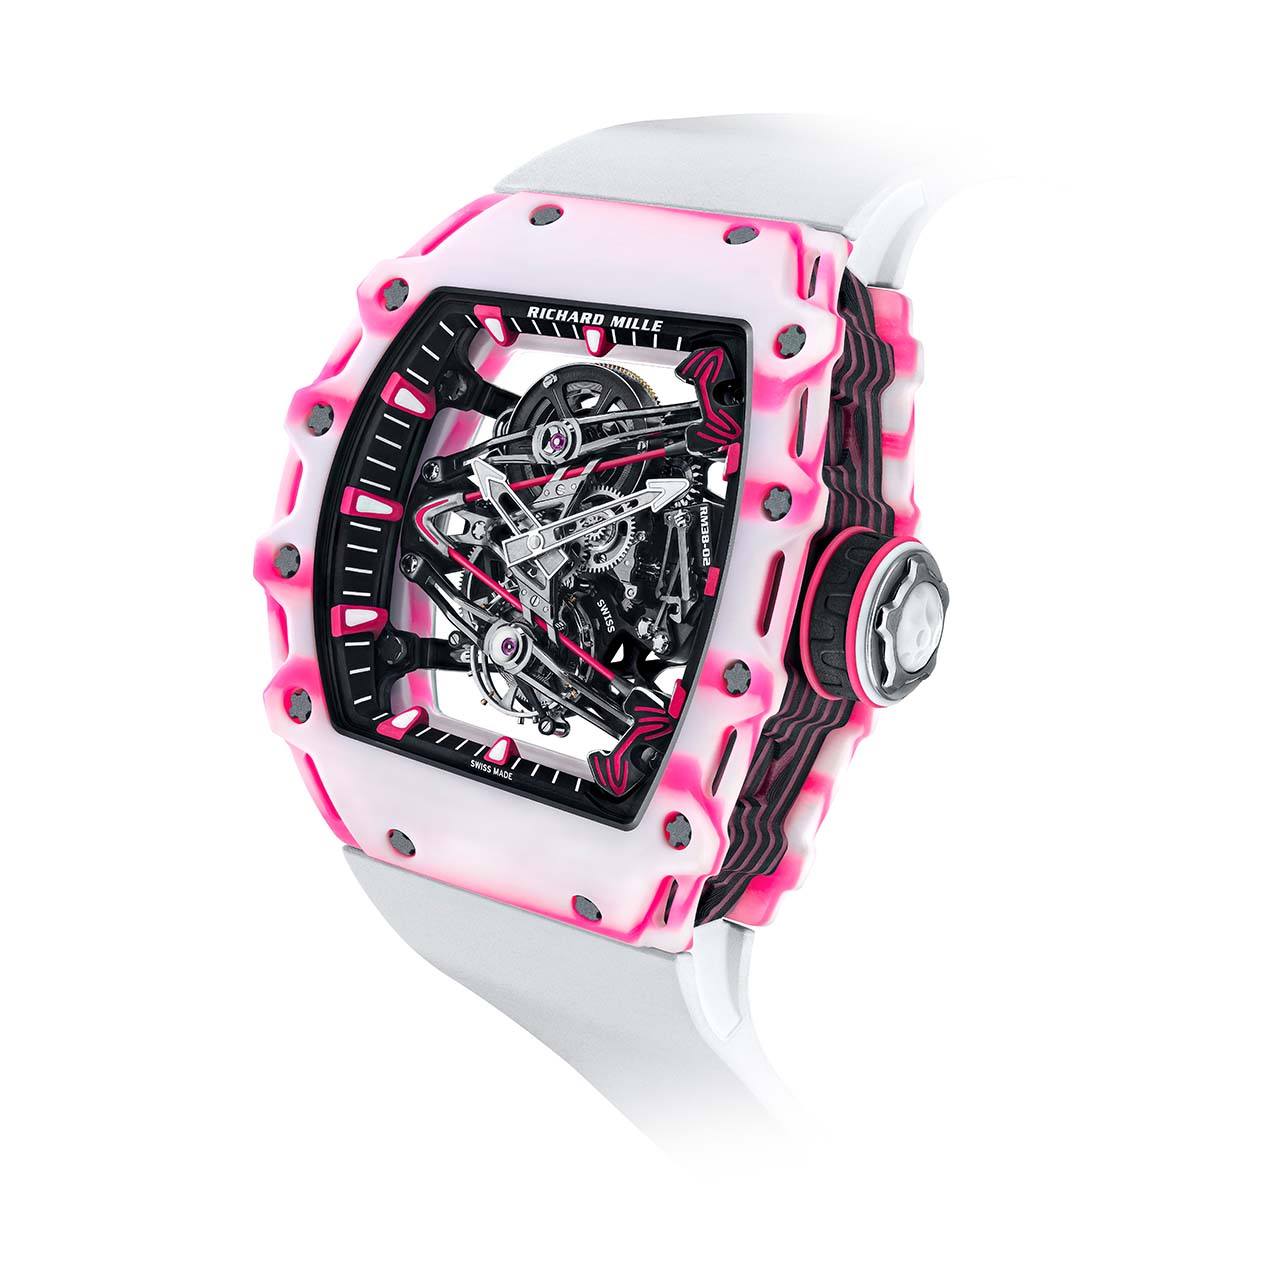 Richard Mille watch with a white wristband and pink and white face